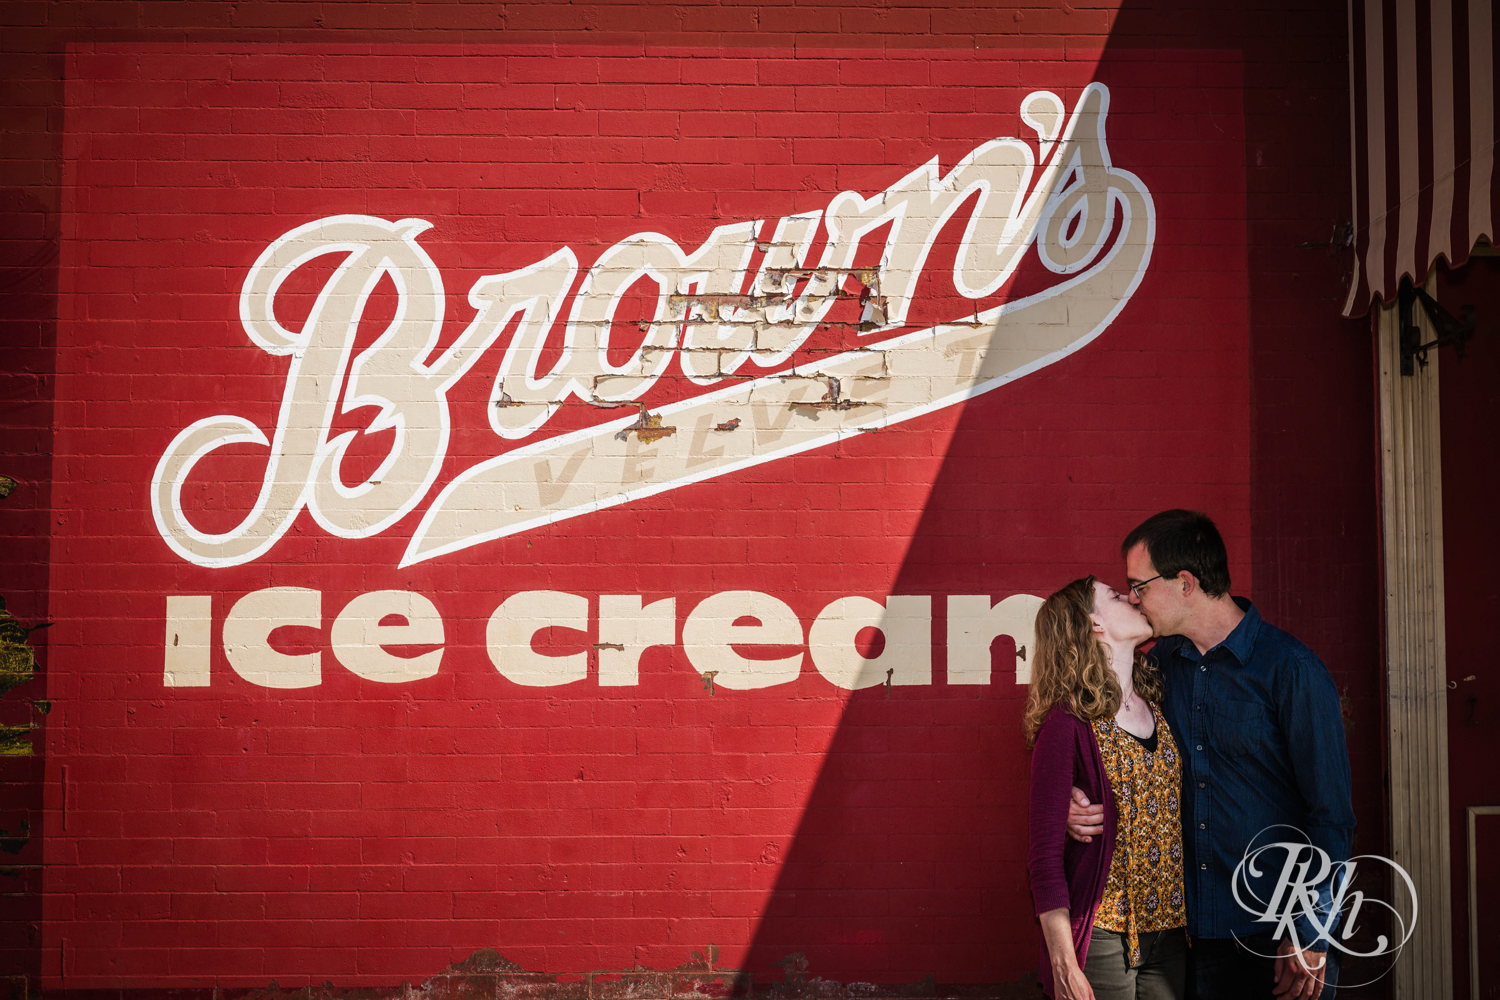 Man and woman kiss in front of the Brown's Ice Cream parlor in Stillwater, Minnesota.